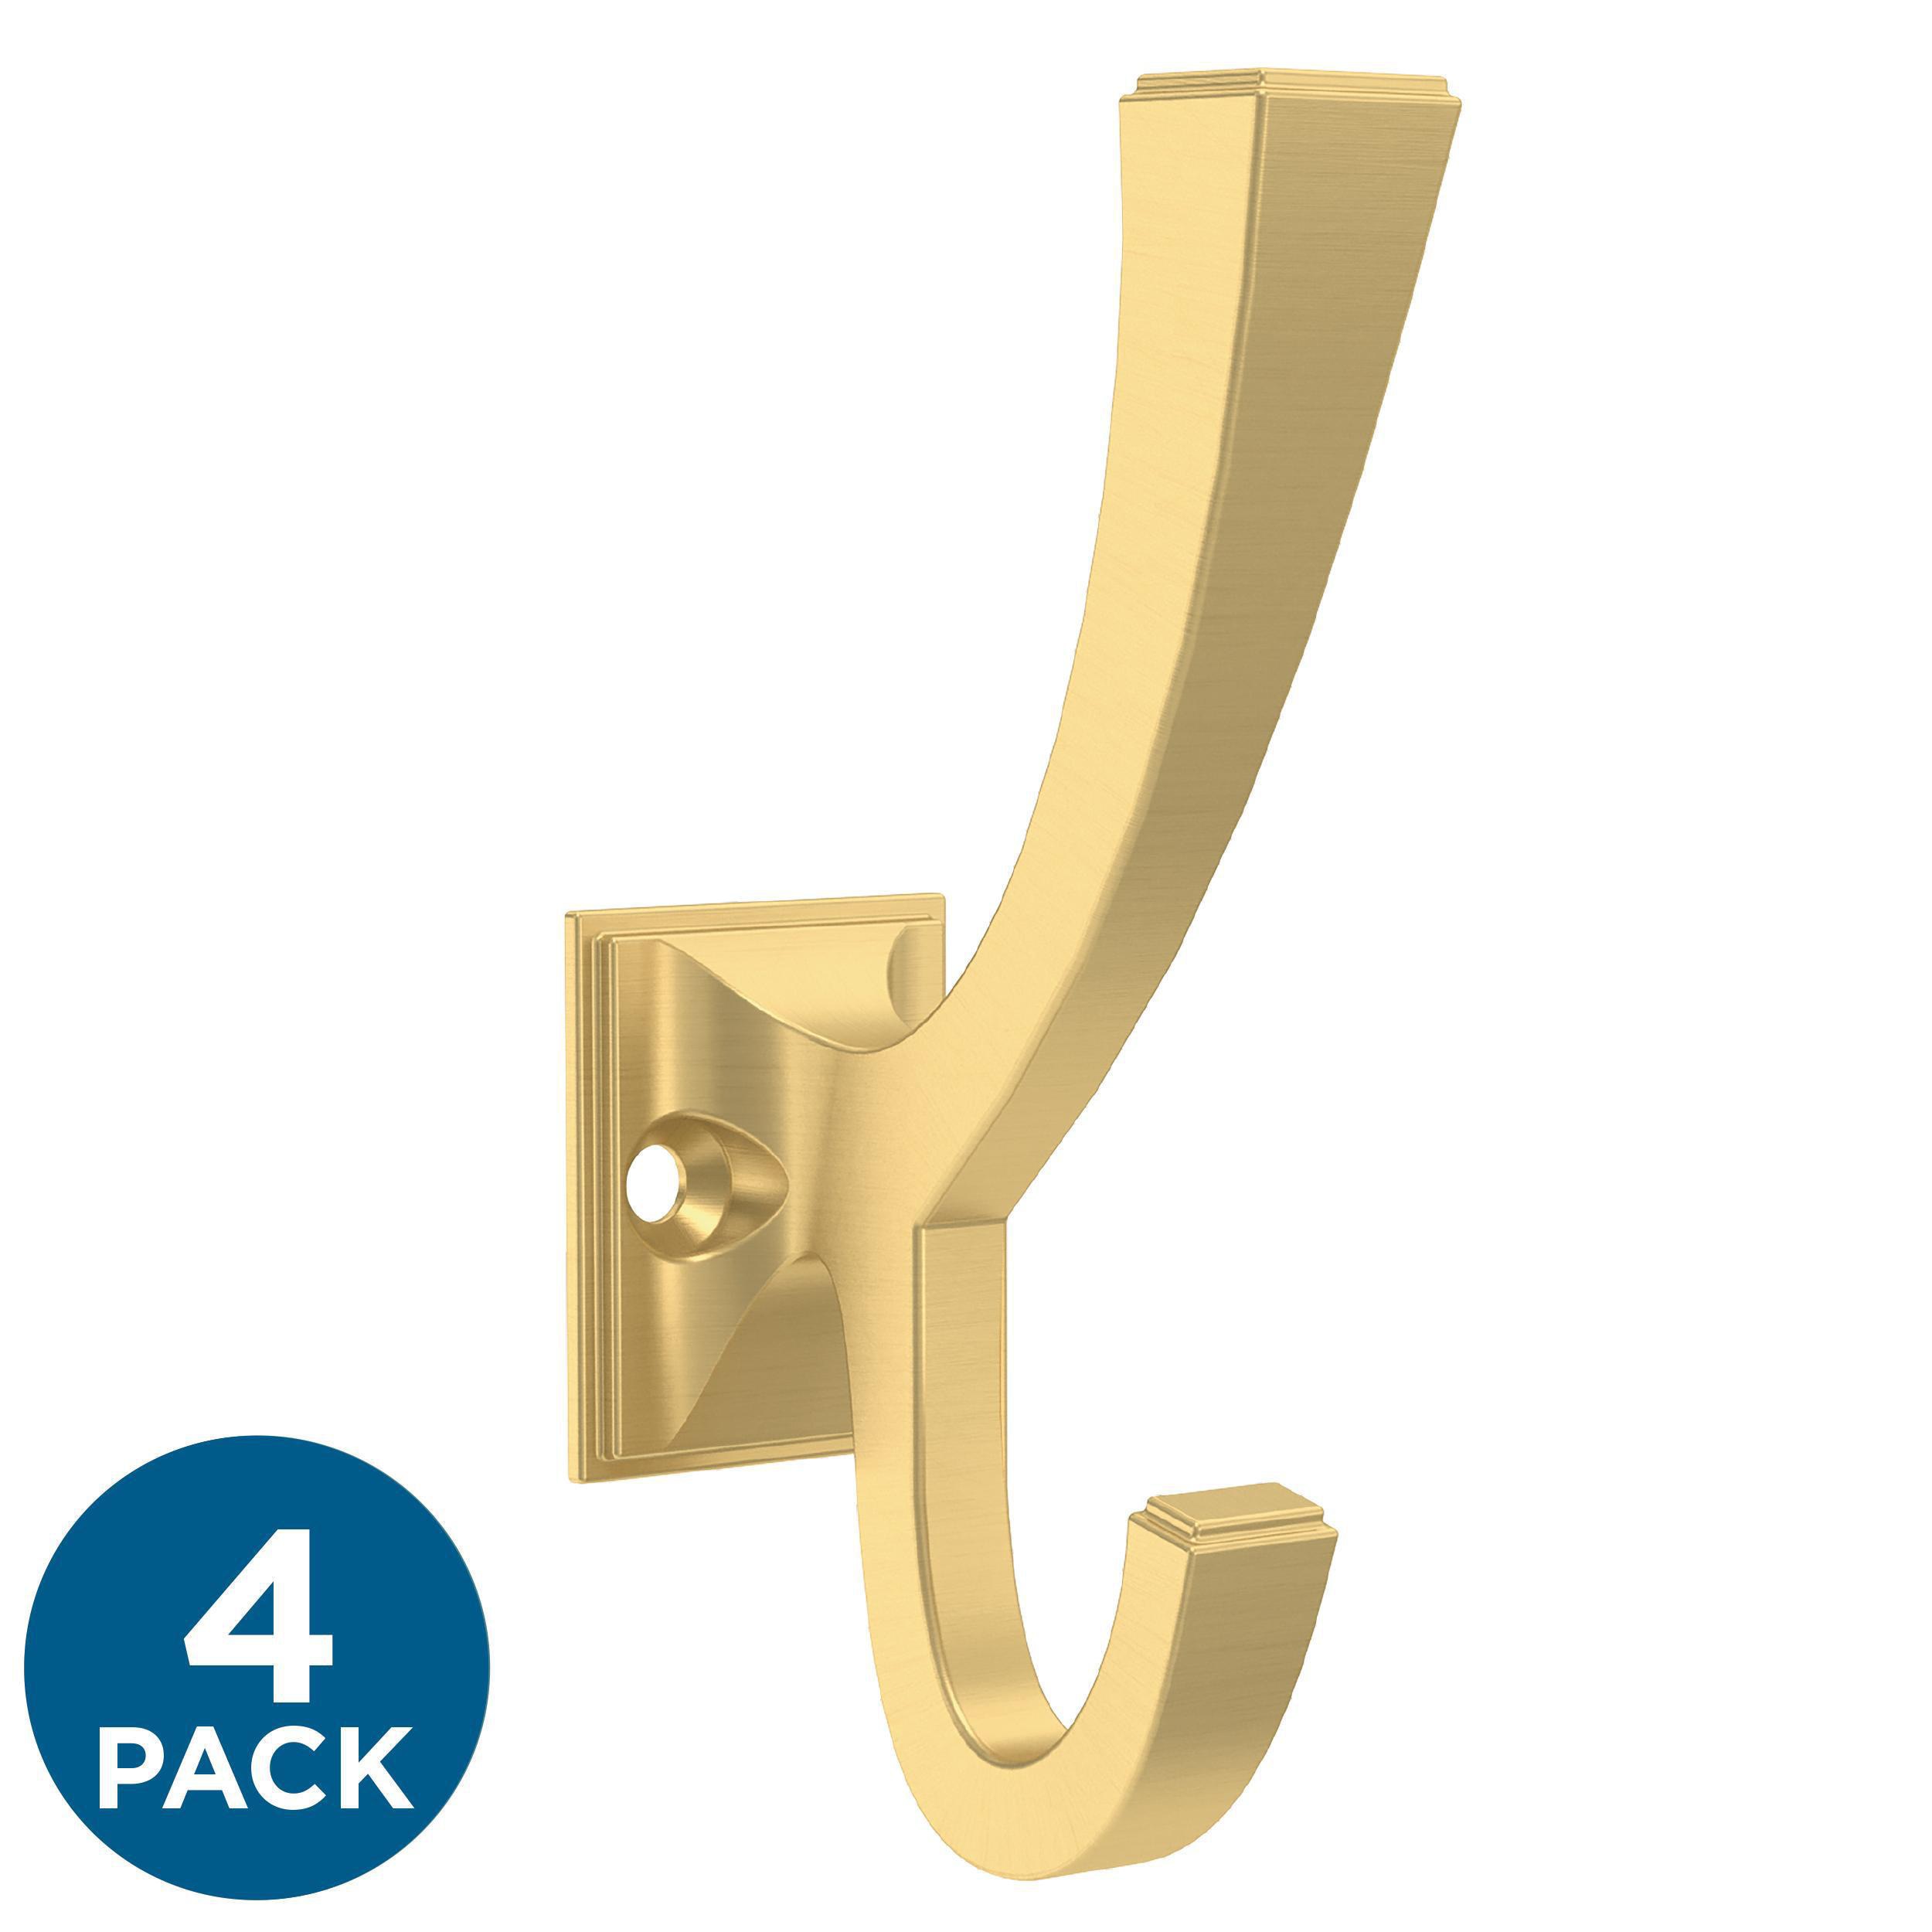 Franklin Brass 4-Pack 2-Hook 1.01-in x 1.3-in H Modern Gold Decorative Wall Hook (35-lb Capacity) | B47250K-117-C